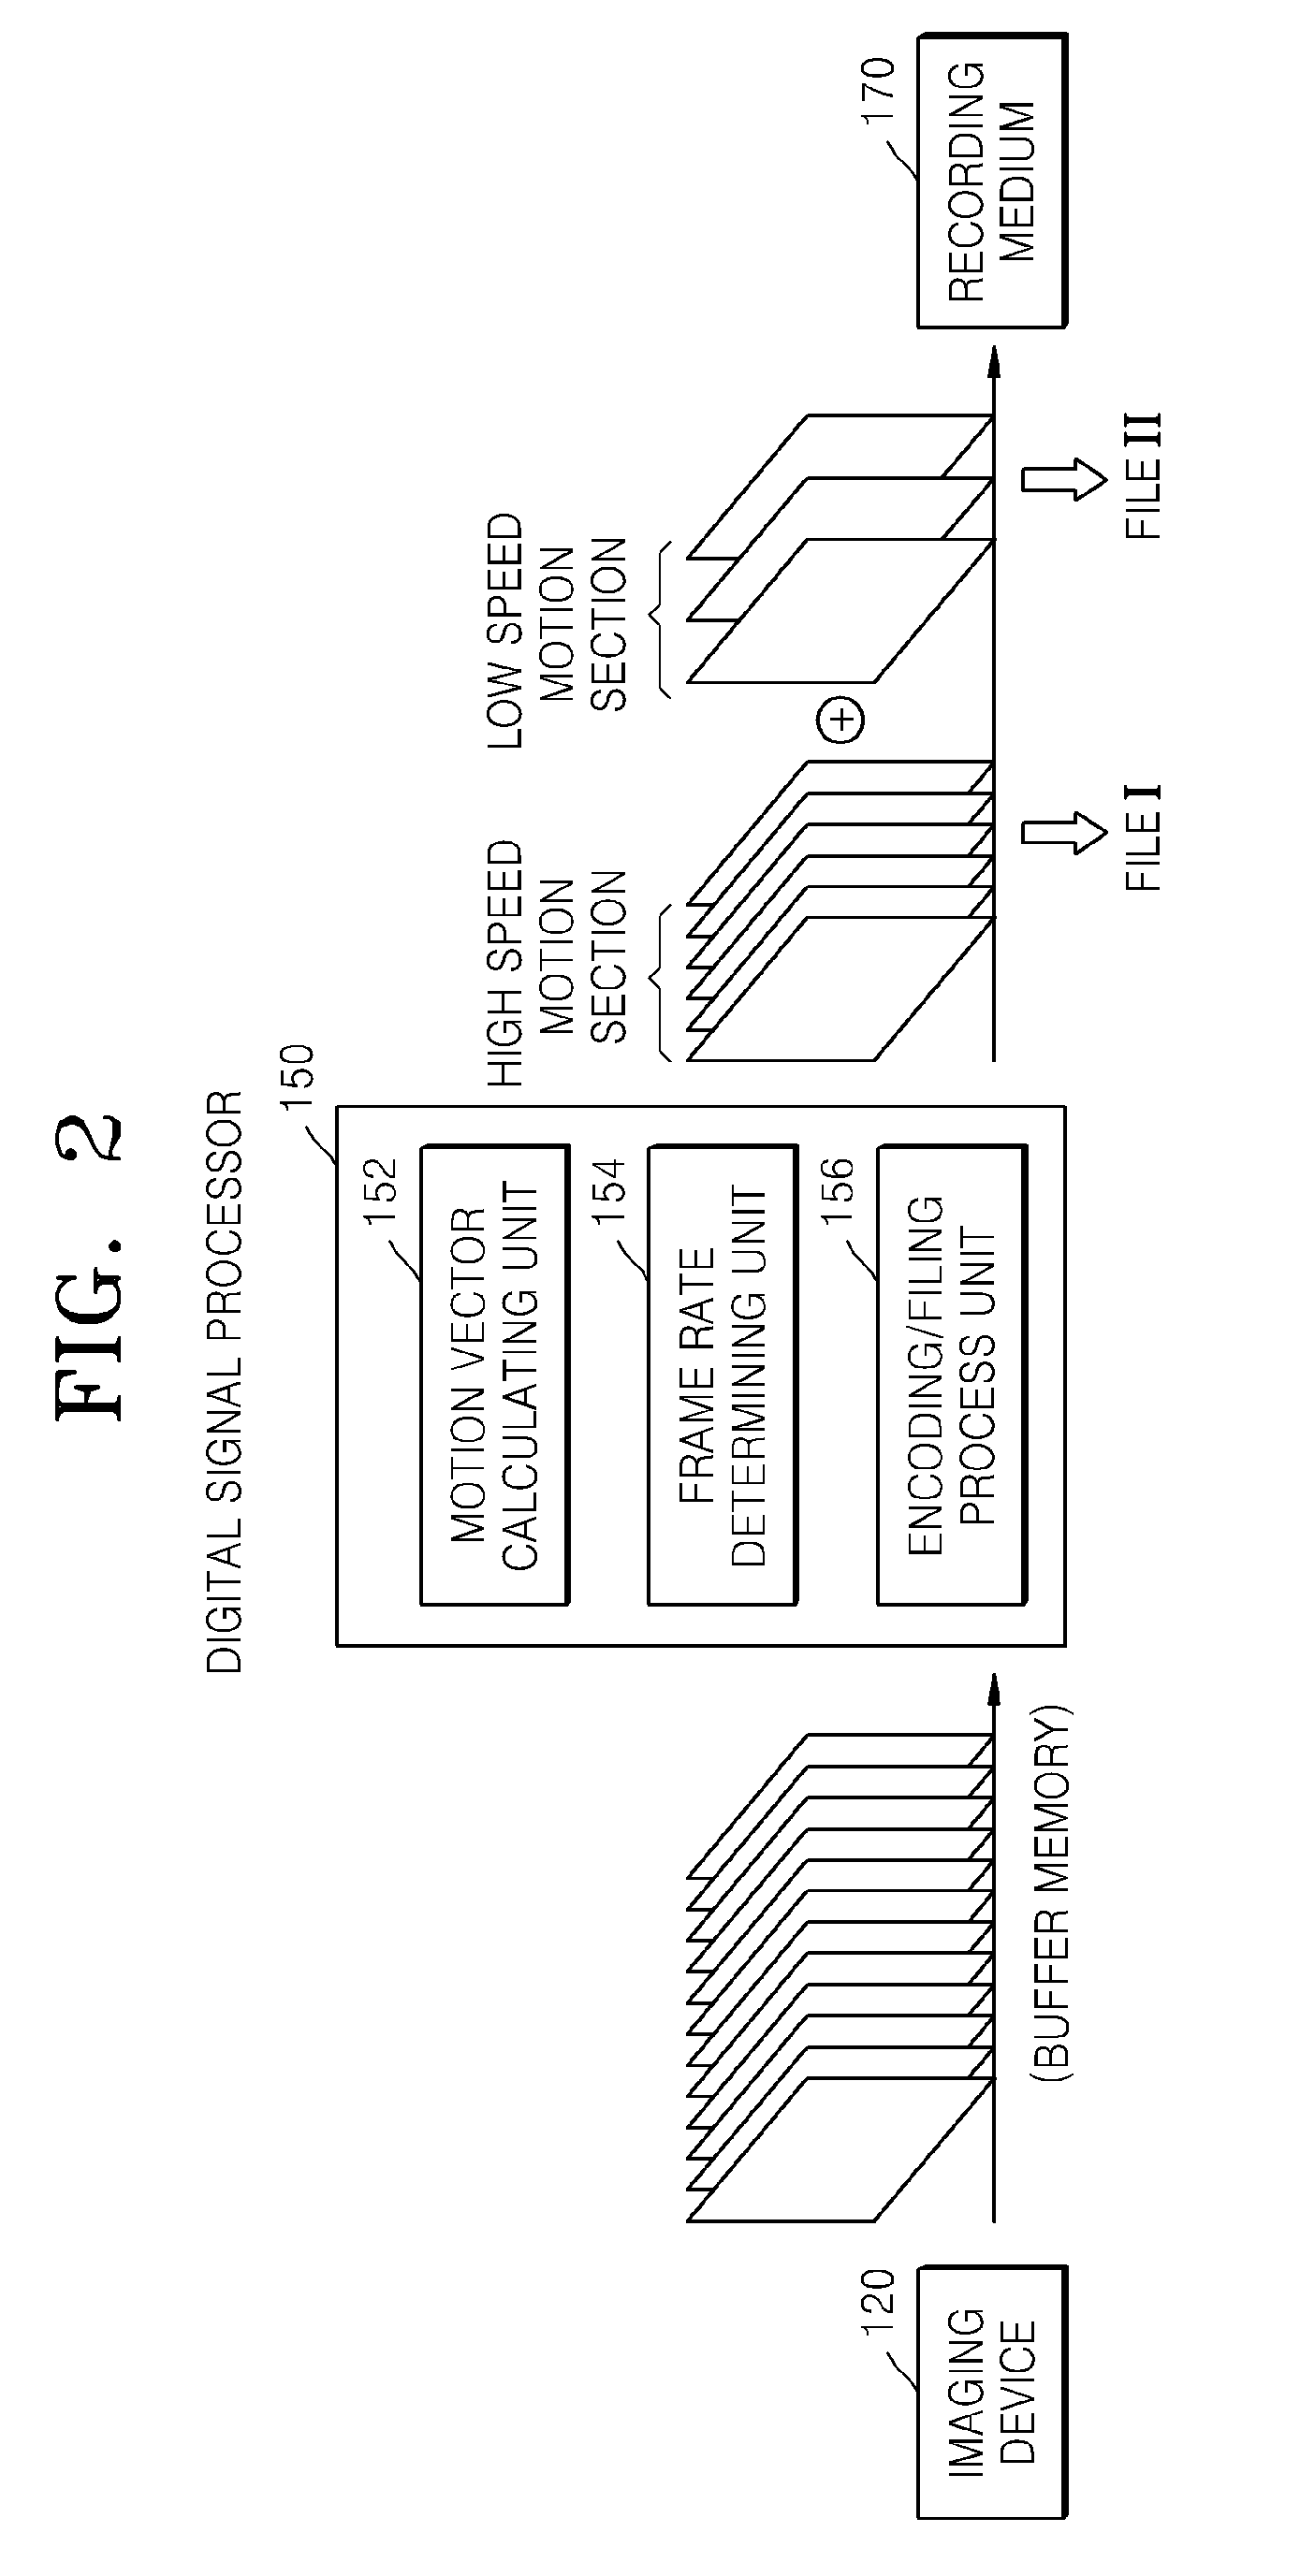 Digital camera having a variable frame rate and method of controlling the digital camera